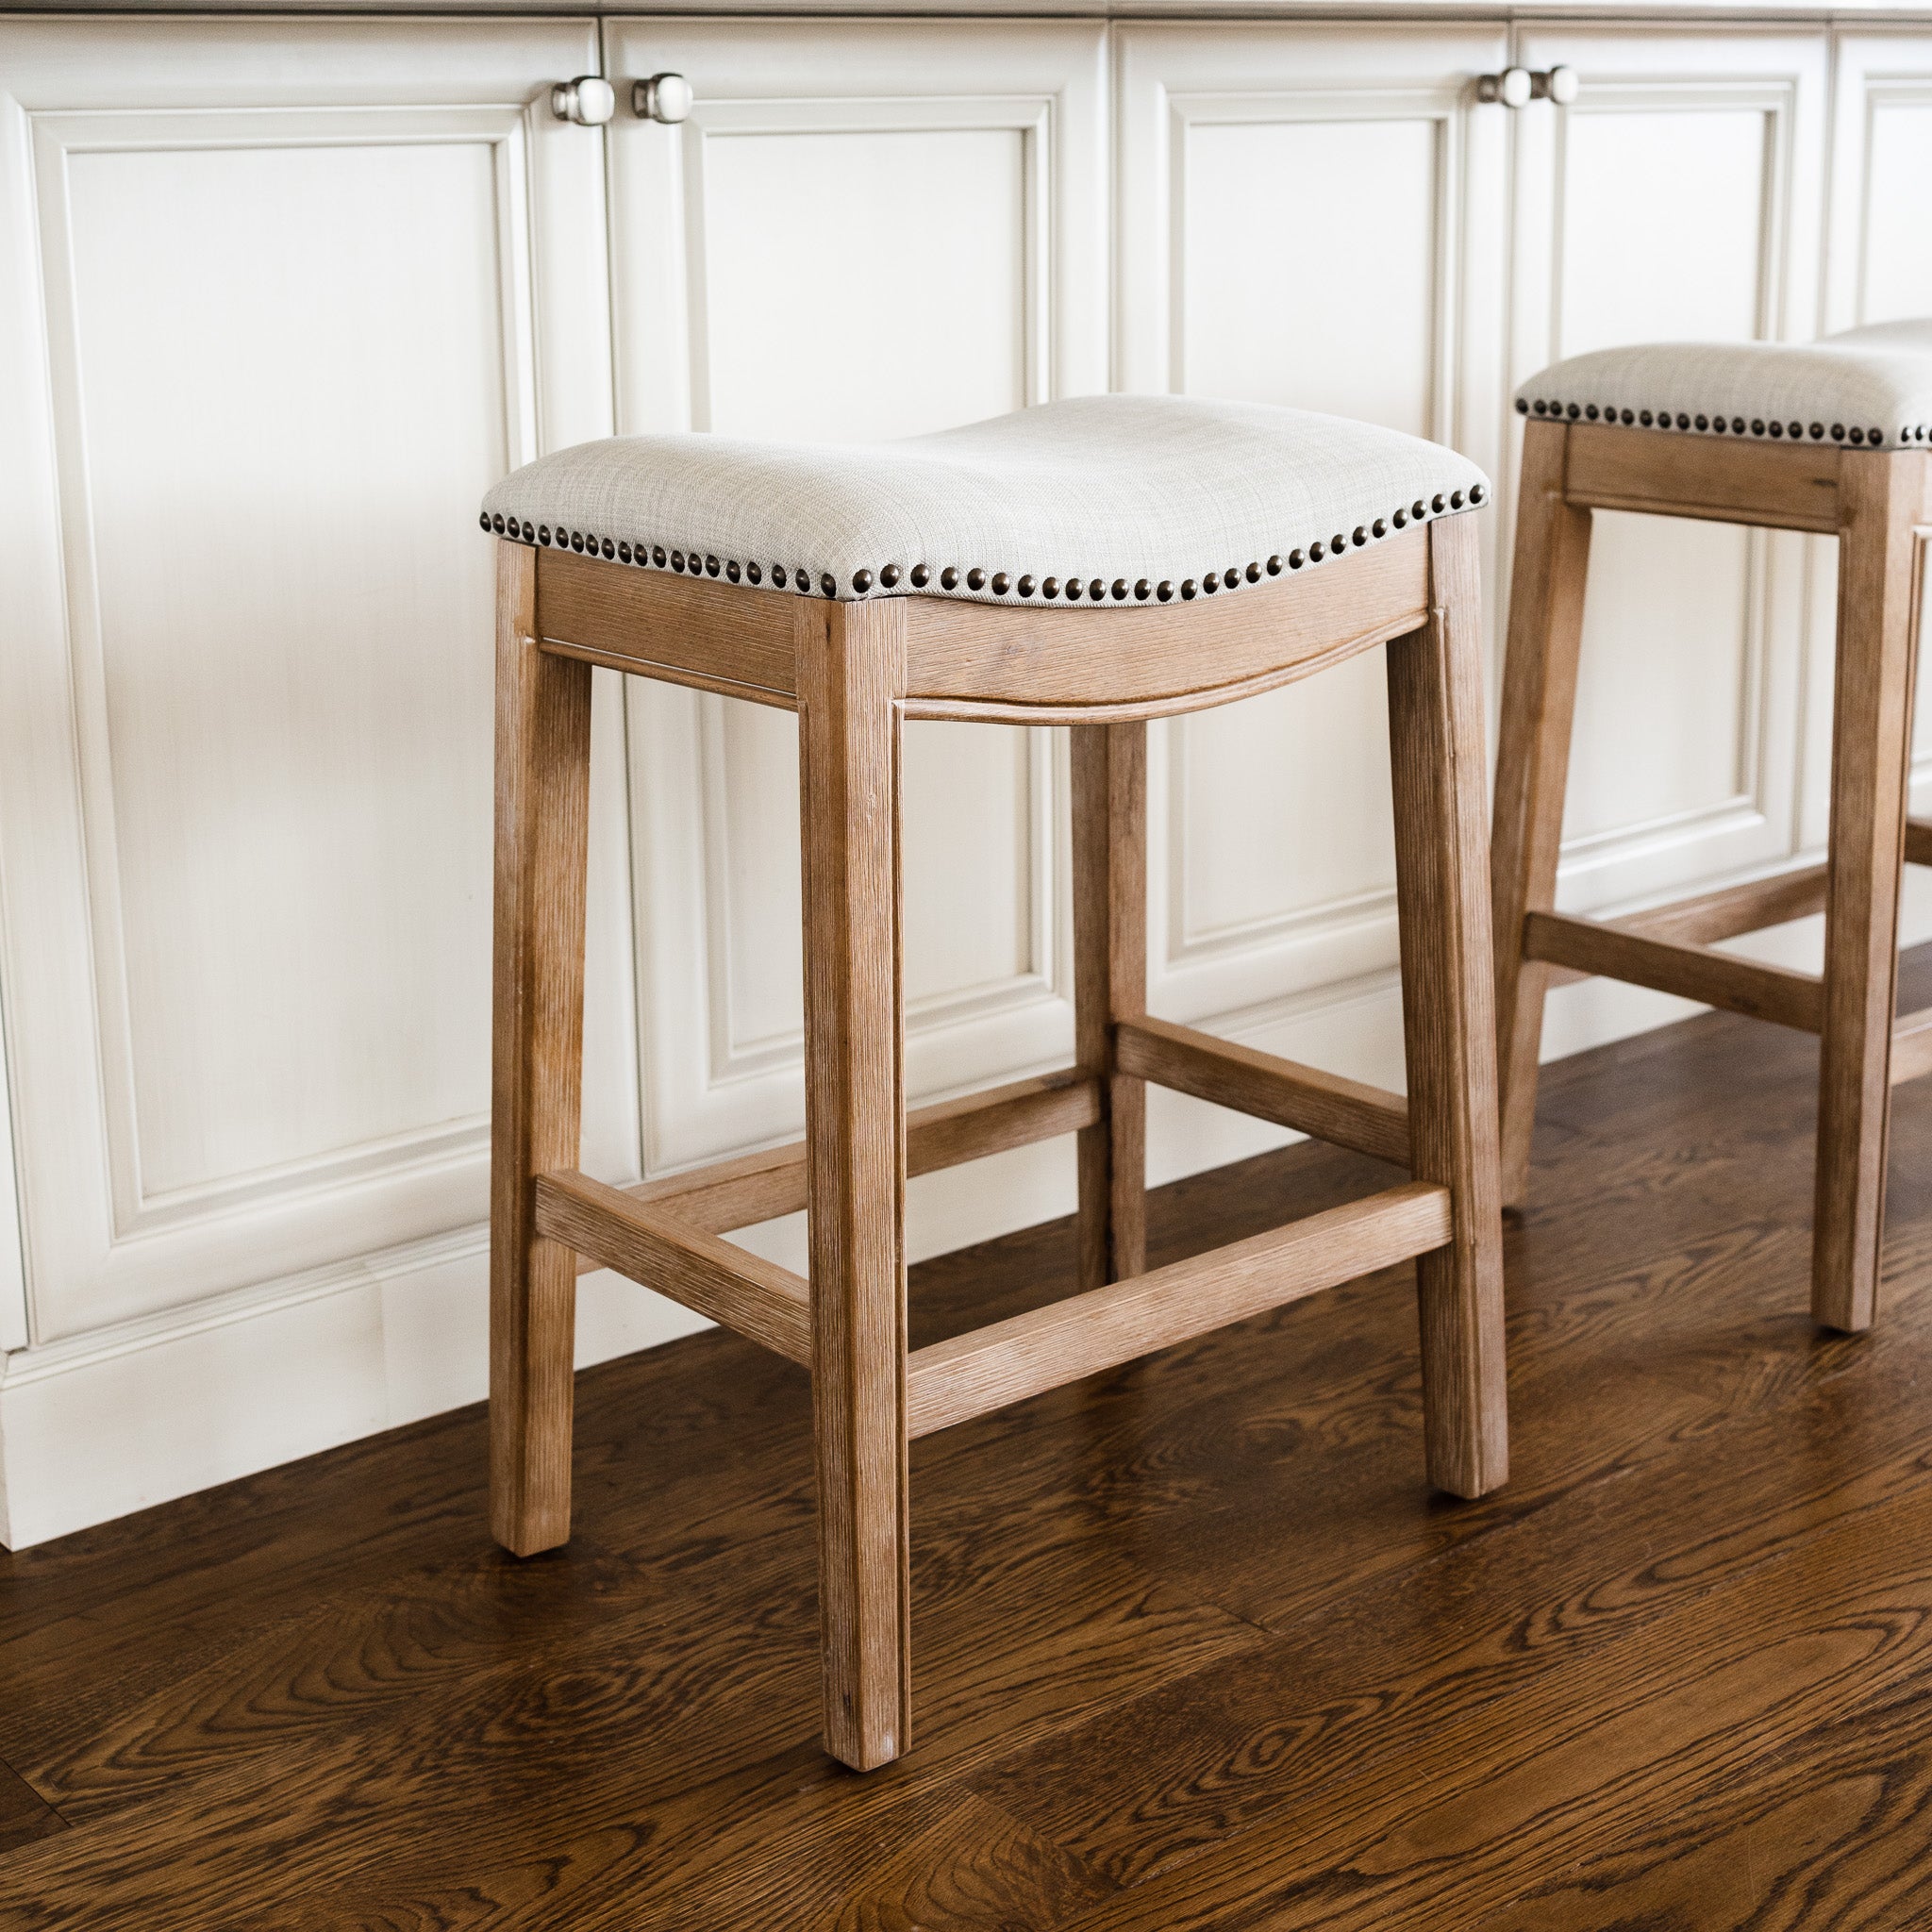 Adrien Saddle Counter Stool in Weathered Oak Finish with Sand Color Fabric Upholstery in Stools by Maven Lane